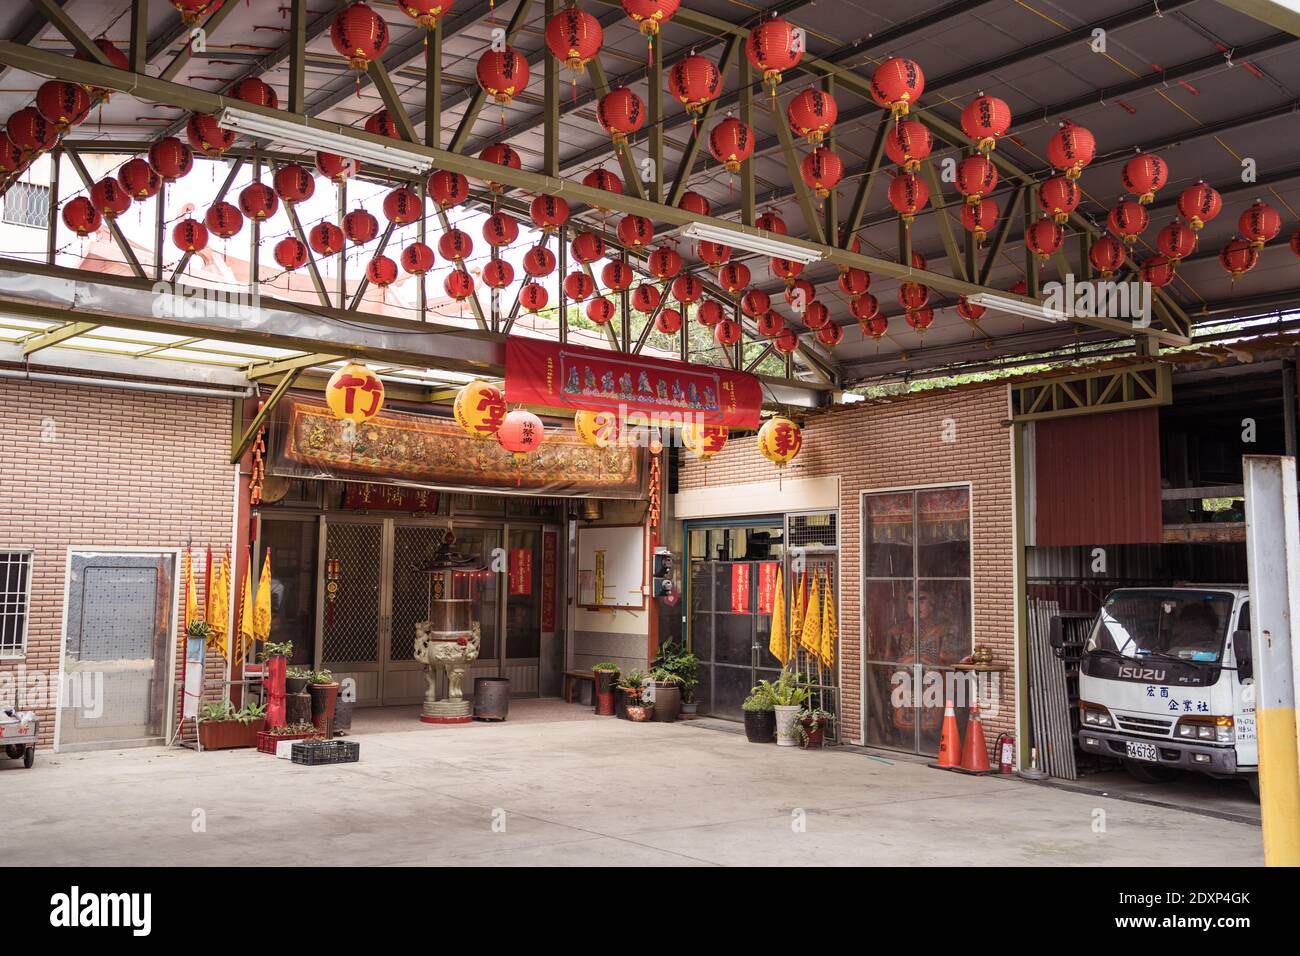 Hsinchu / Taiwan - March 20, 2020: small taoist temple with red lanterns in rural area of Taiwan Stock Photo